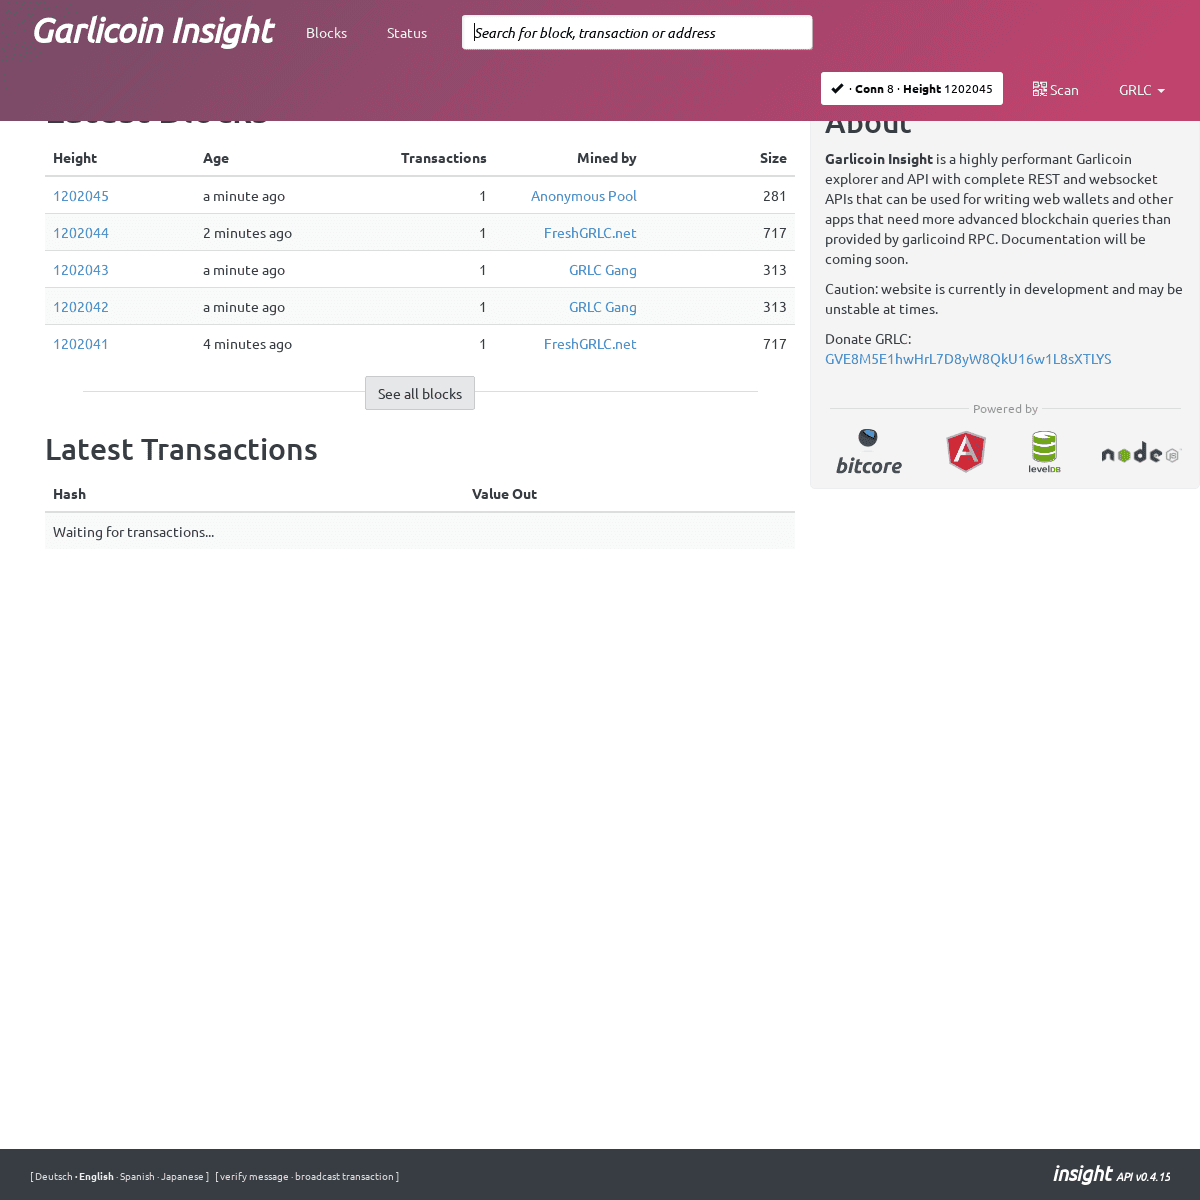 A complete backup of garli.co.in